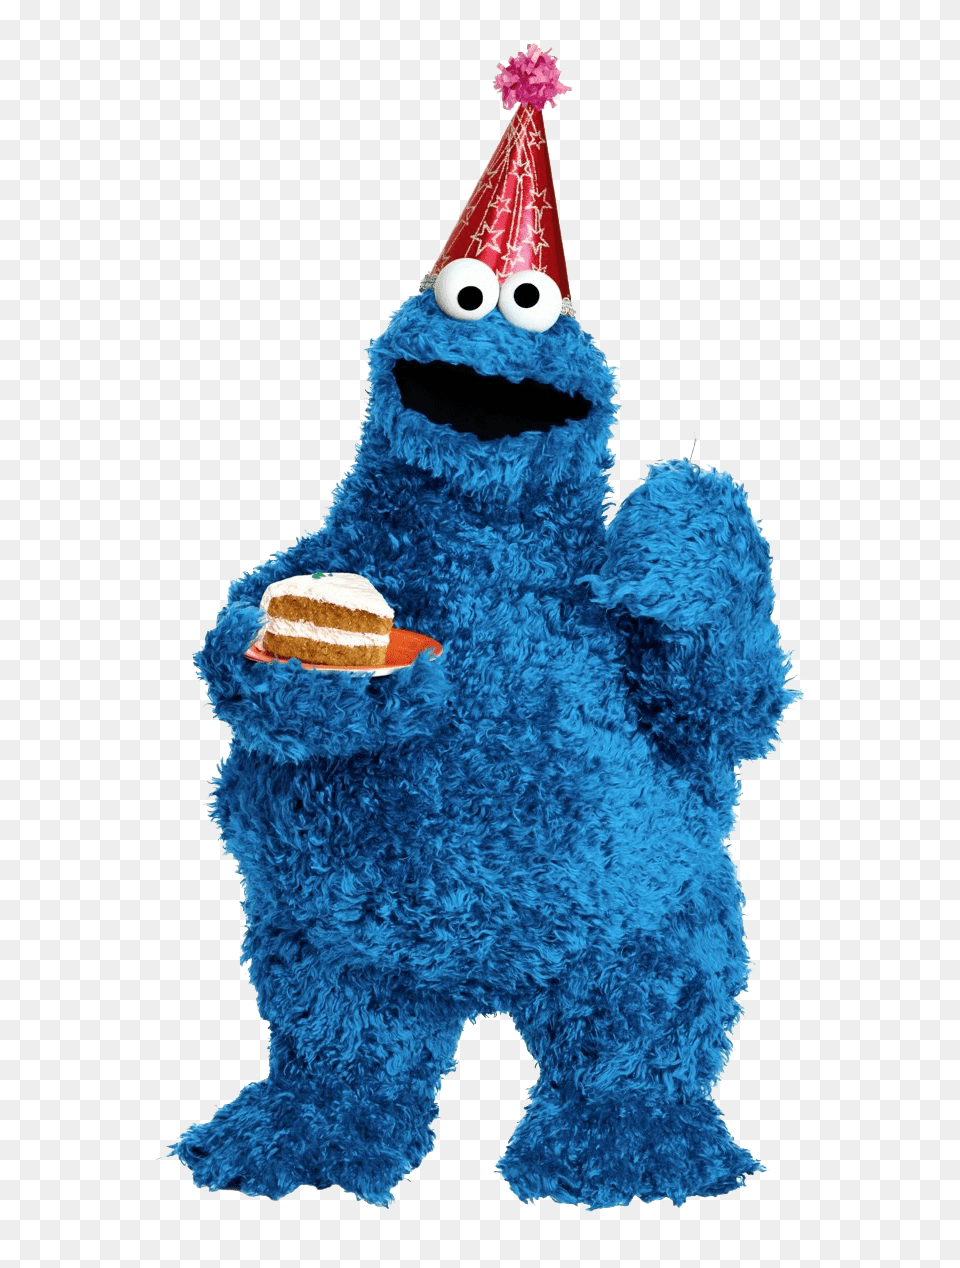 Cookie Monster Clip Art 5 2 Cookie Monster Birthday Card, Clothing, Hat, Toy, Pinata Free Png